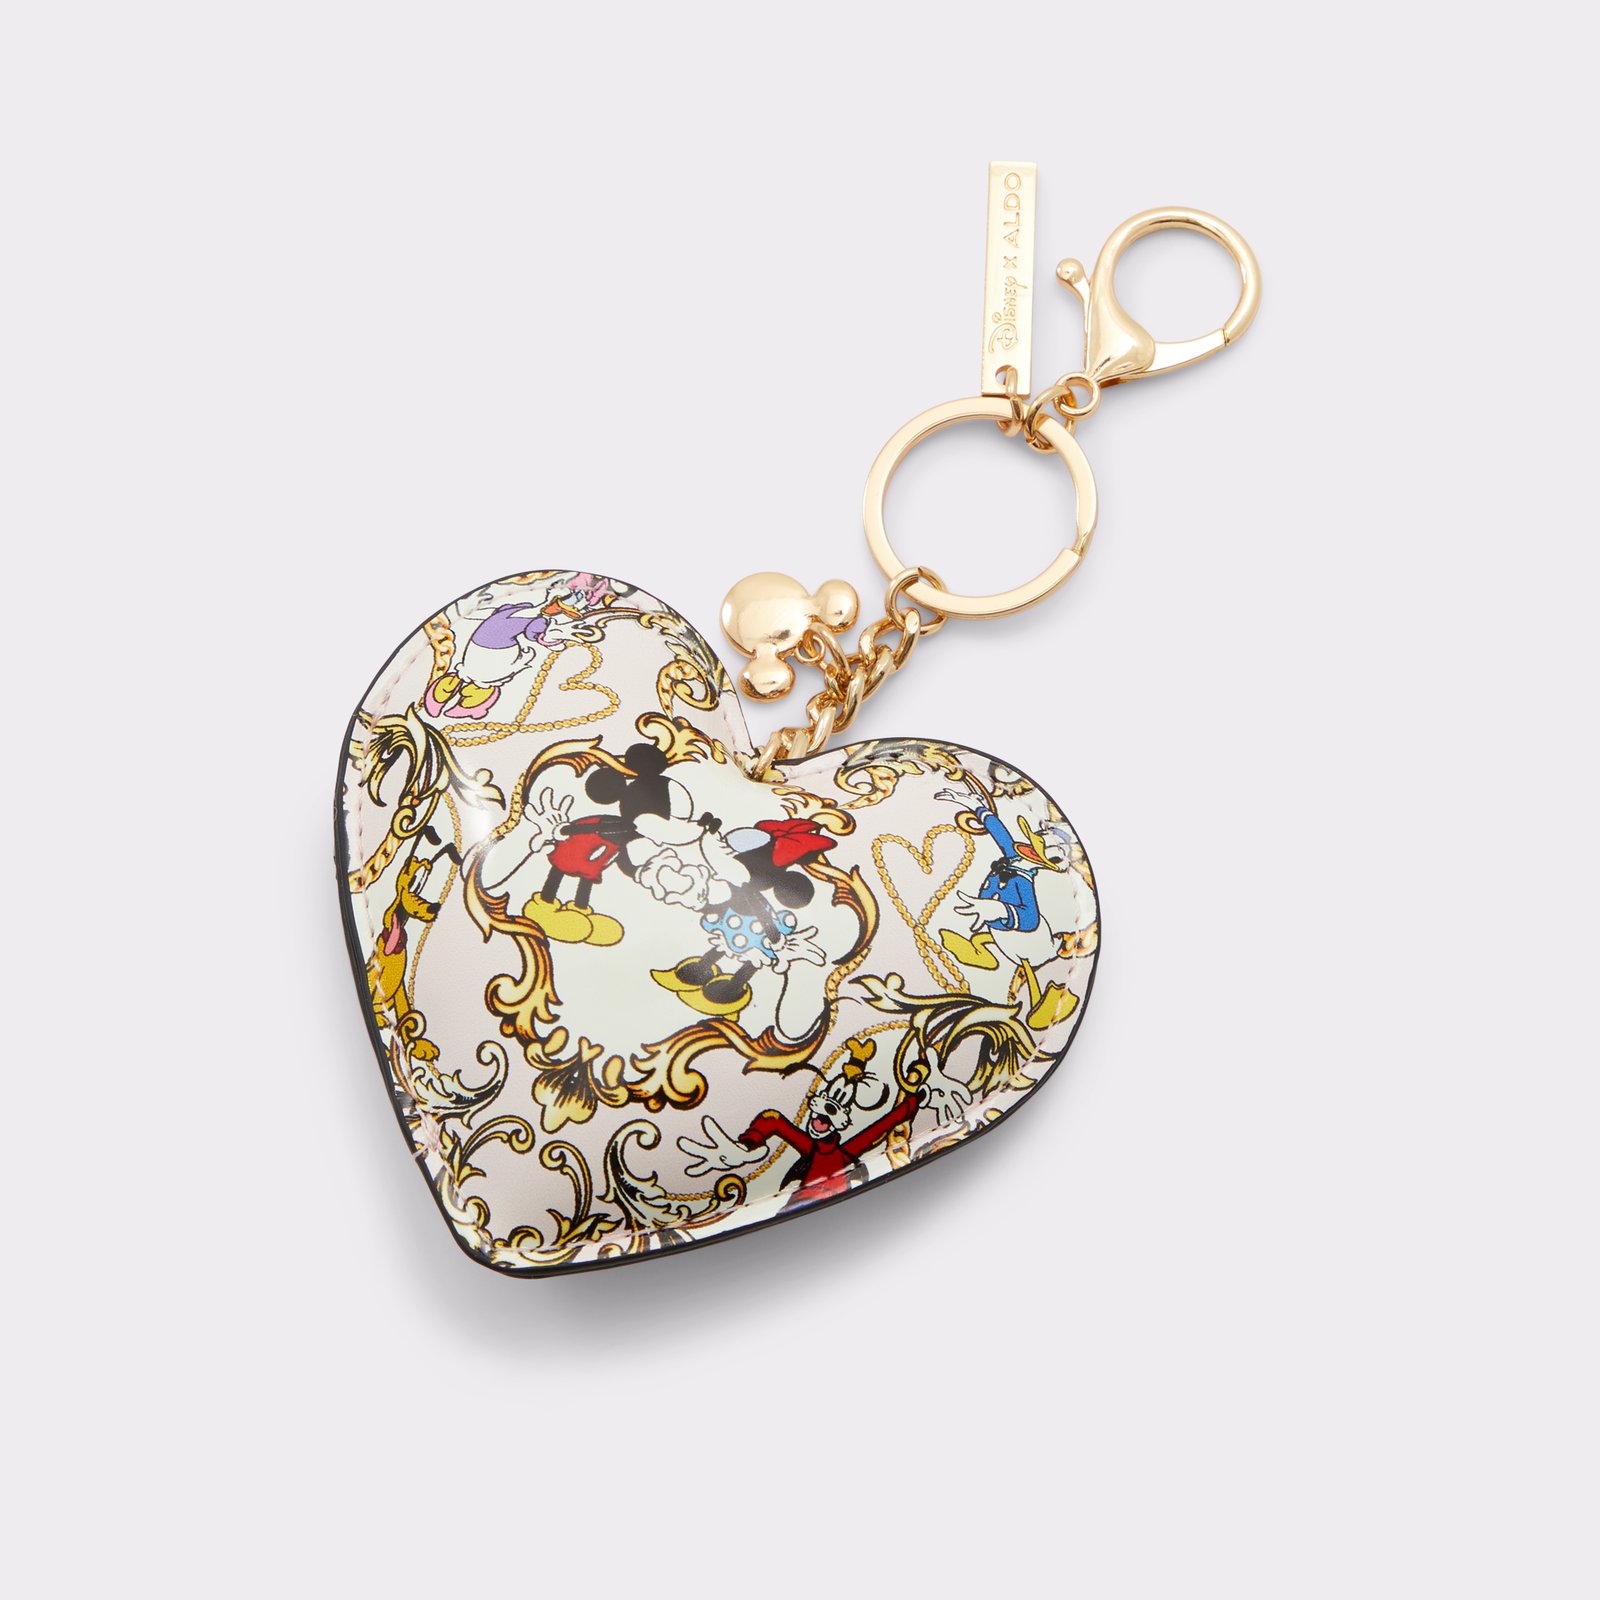 Disney and Aldo Debut 100th Anniversary Accessories Collection